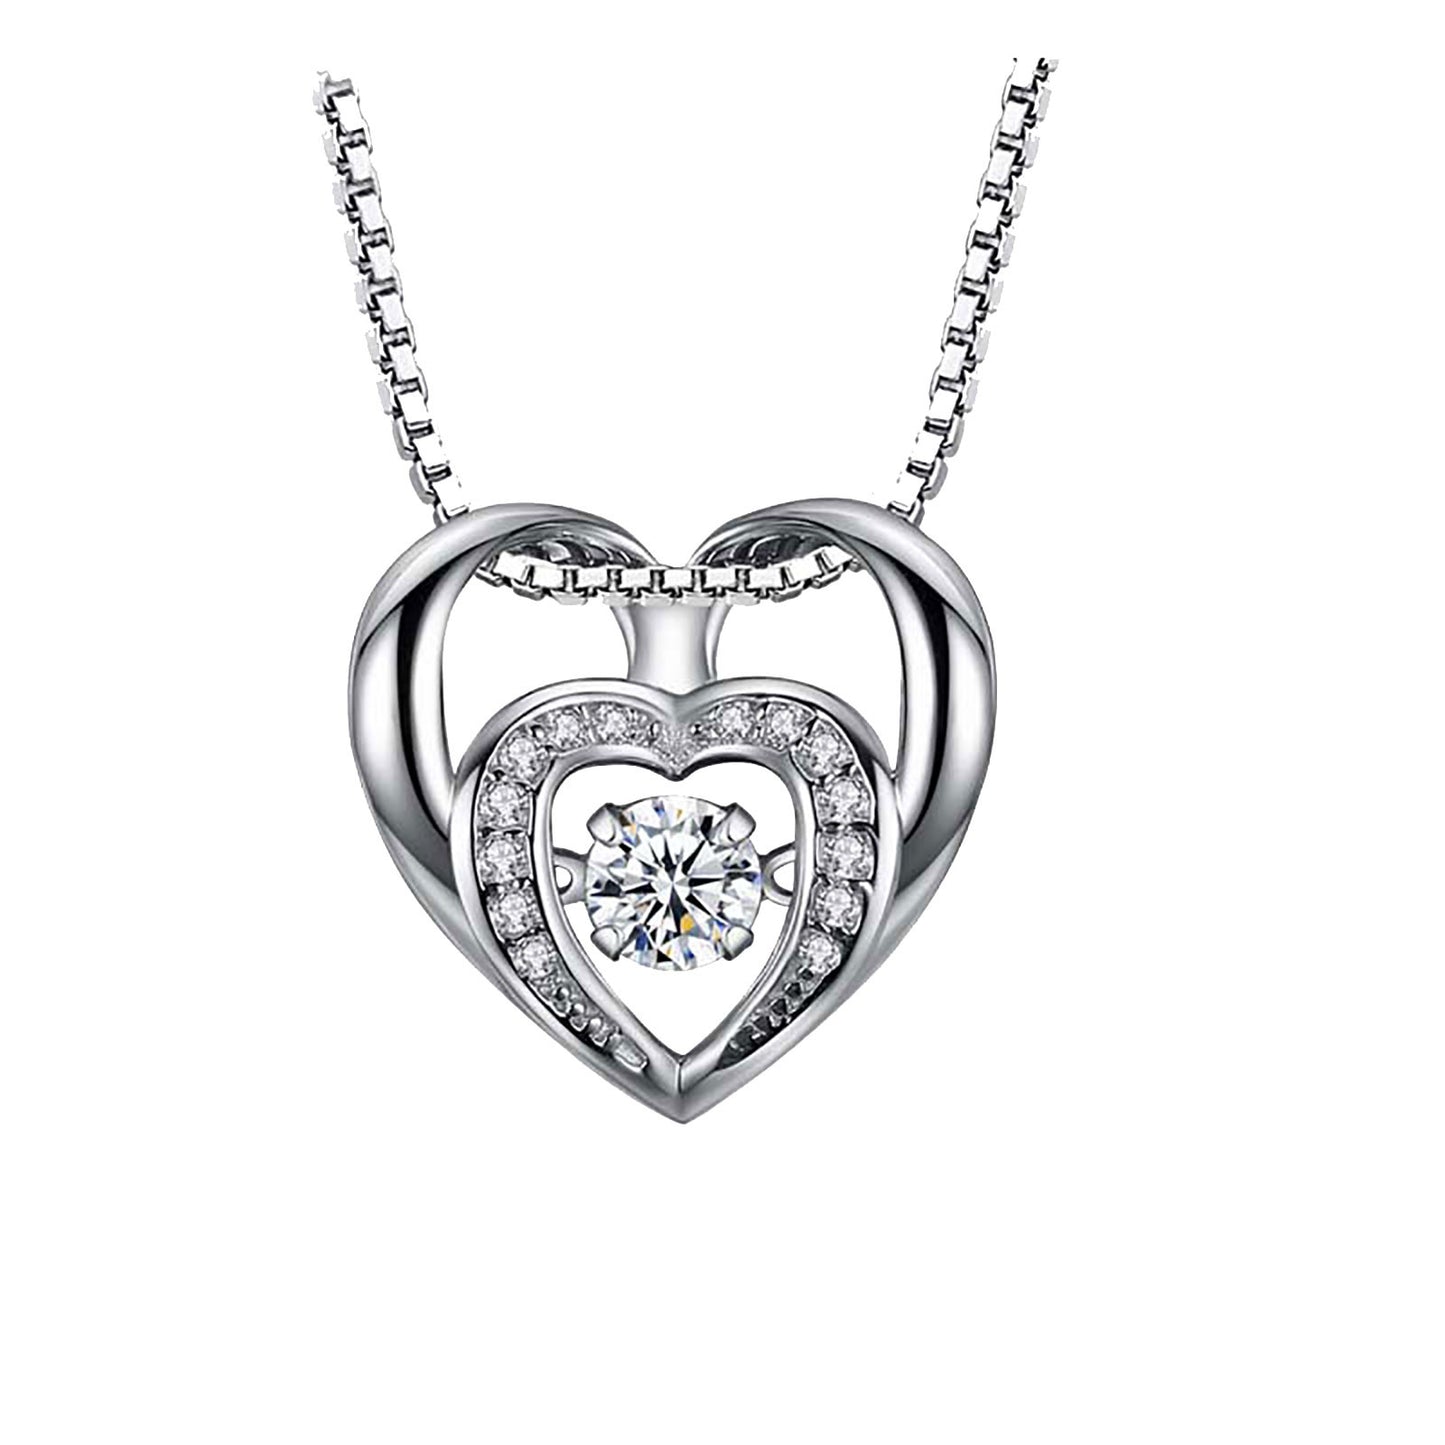 The New Valentine's Day Heartbeat Necklace